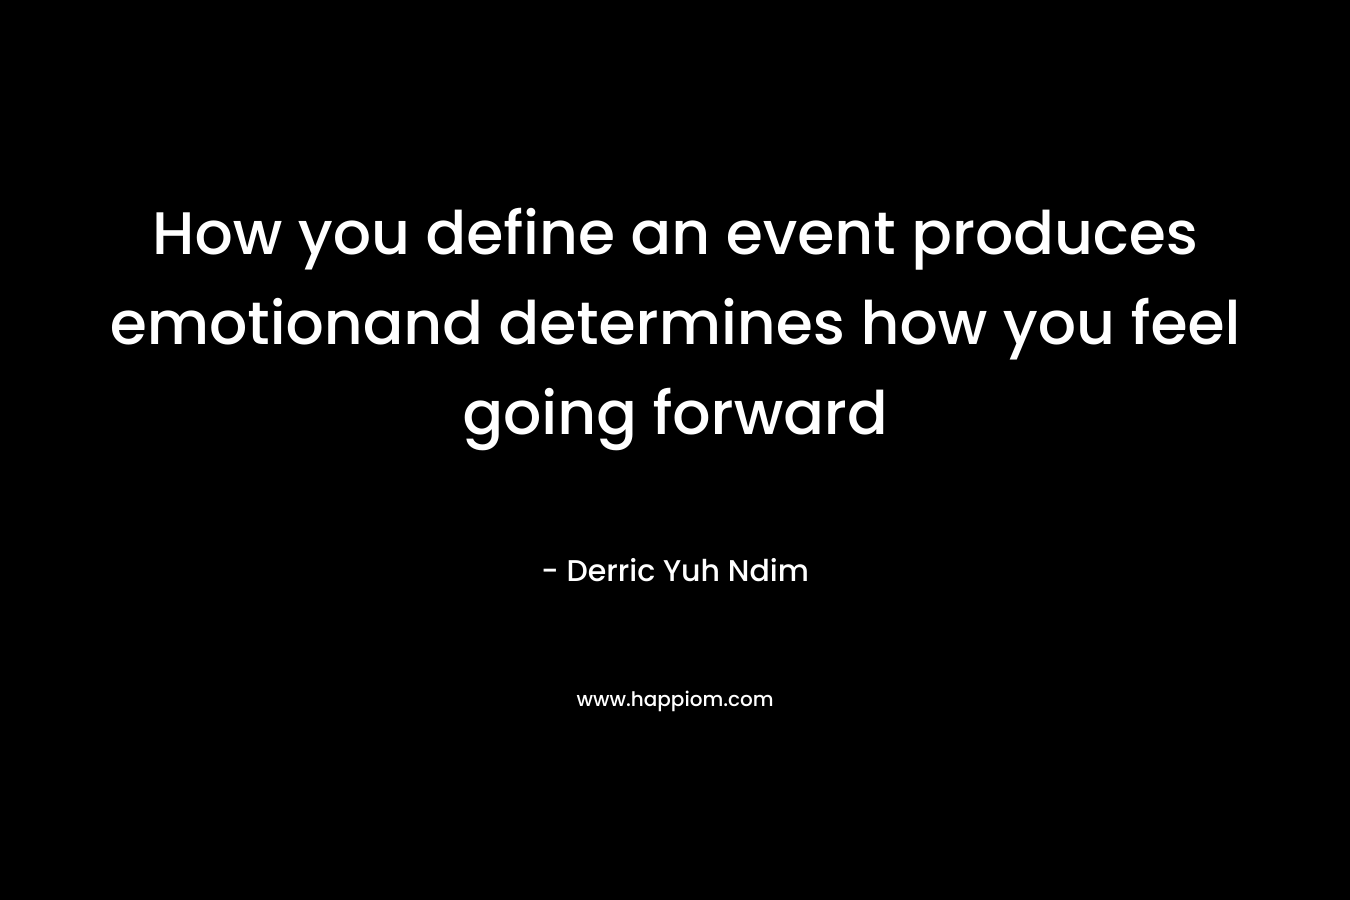 How you define an event produces emotionand determines how you feel going forward – Derric Yuh Ndim